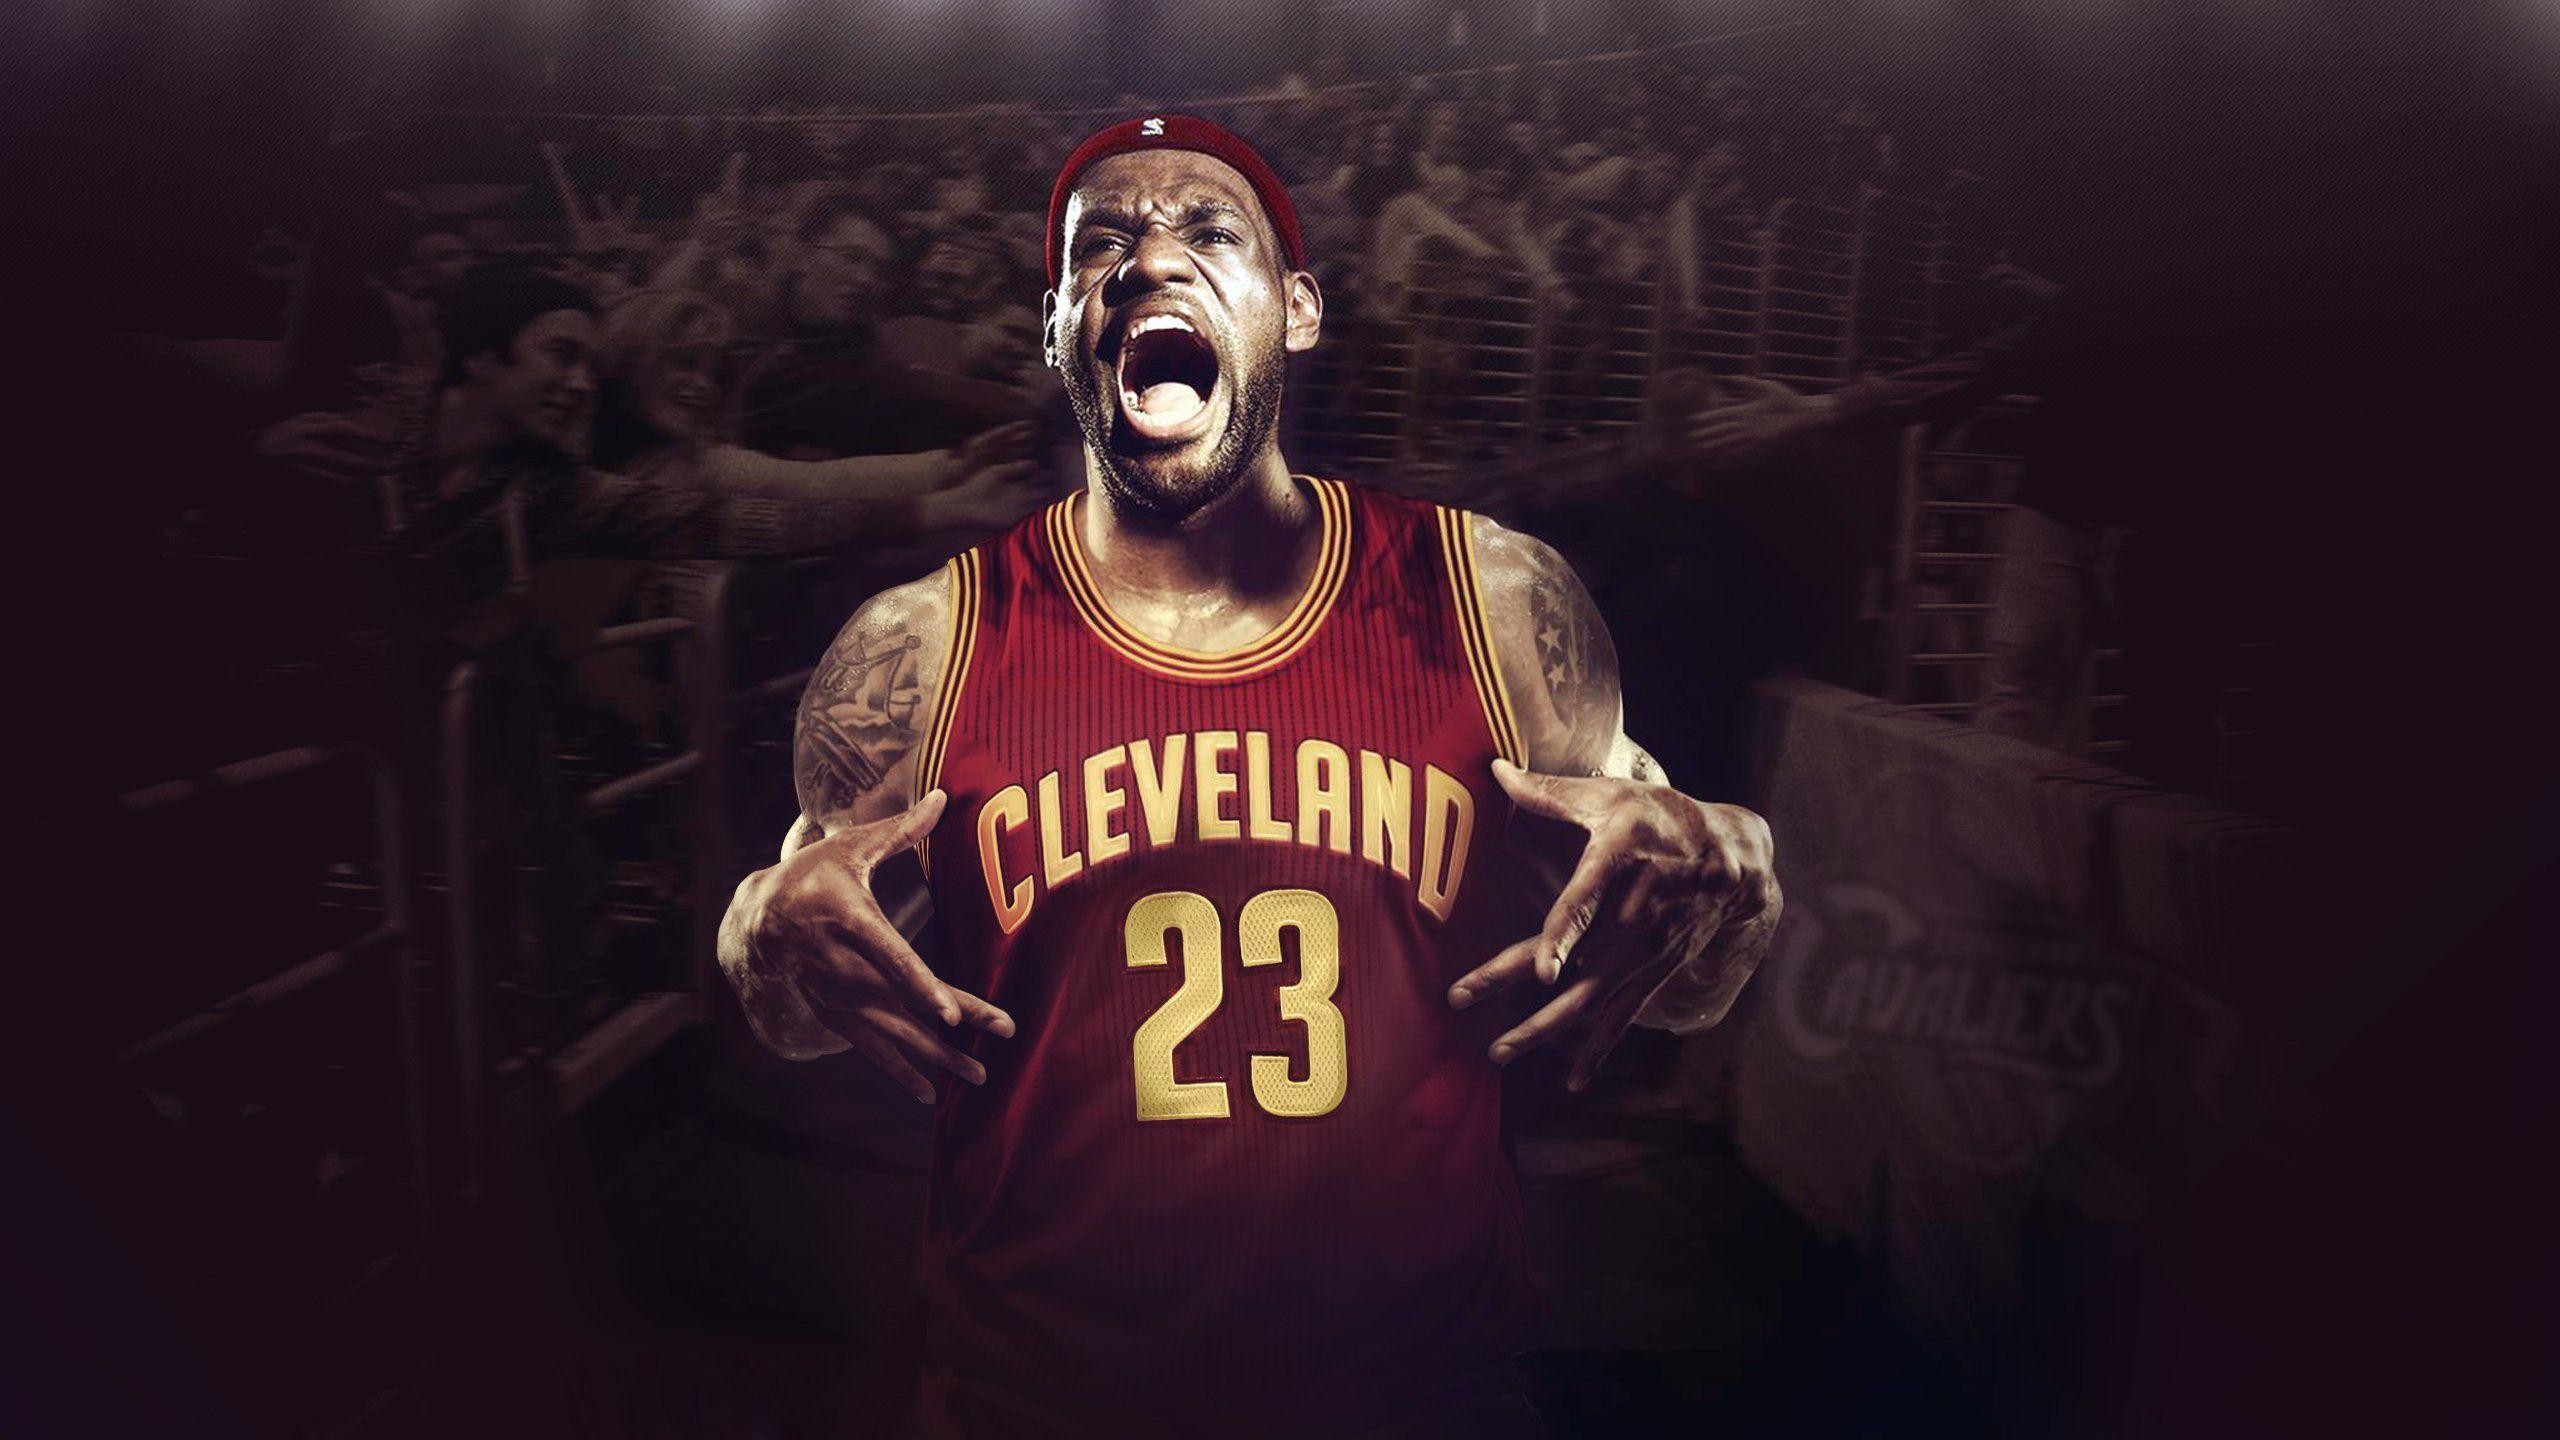 2560x1440 Cleveland Cavaliers Wallpapers HD | Wallpapers, Backgrounds .